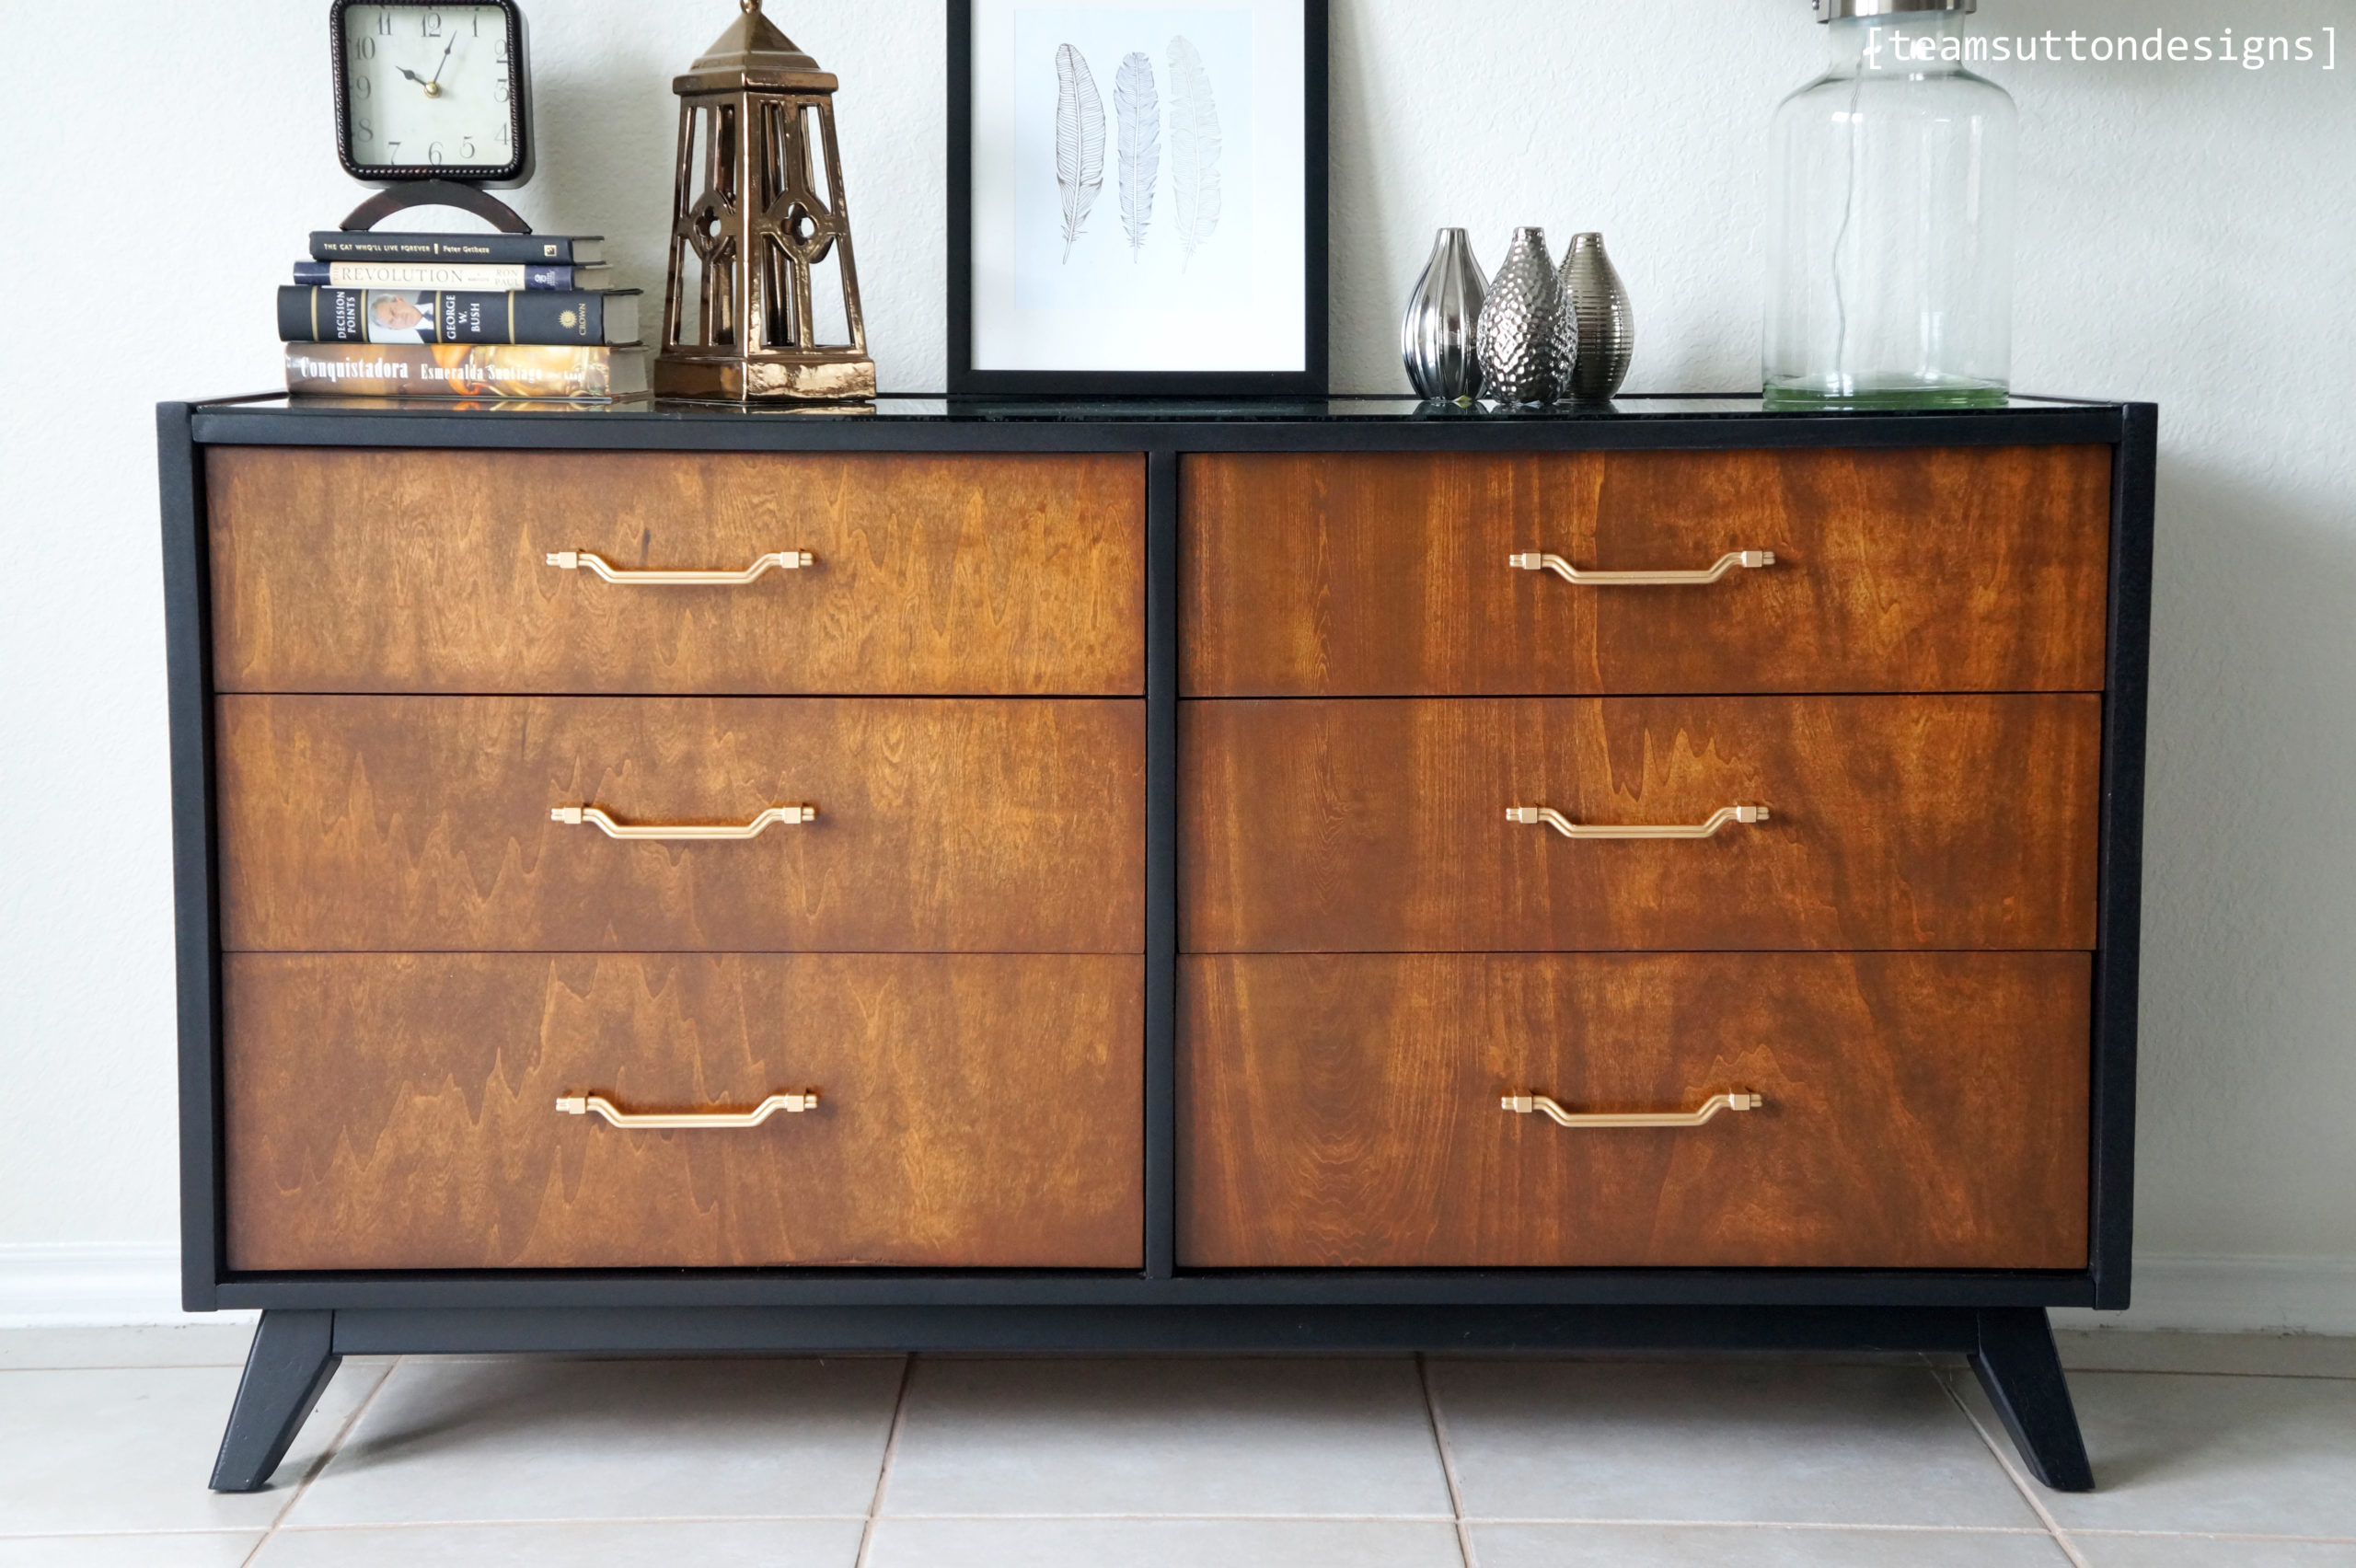 Sleek MCM Credenza and my review of the Earlex Hv5500